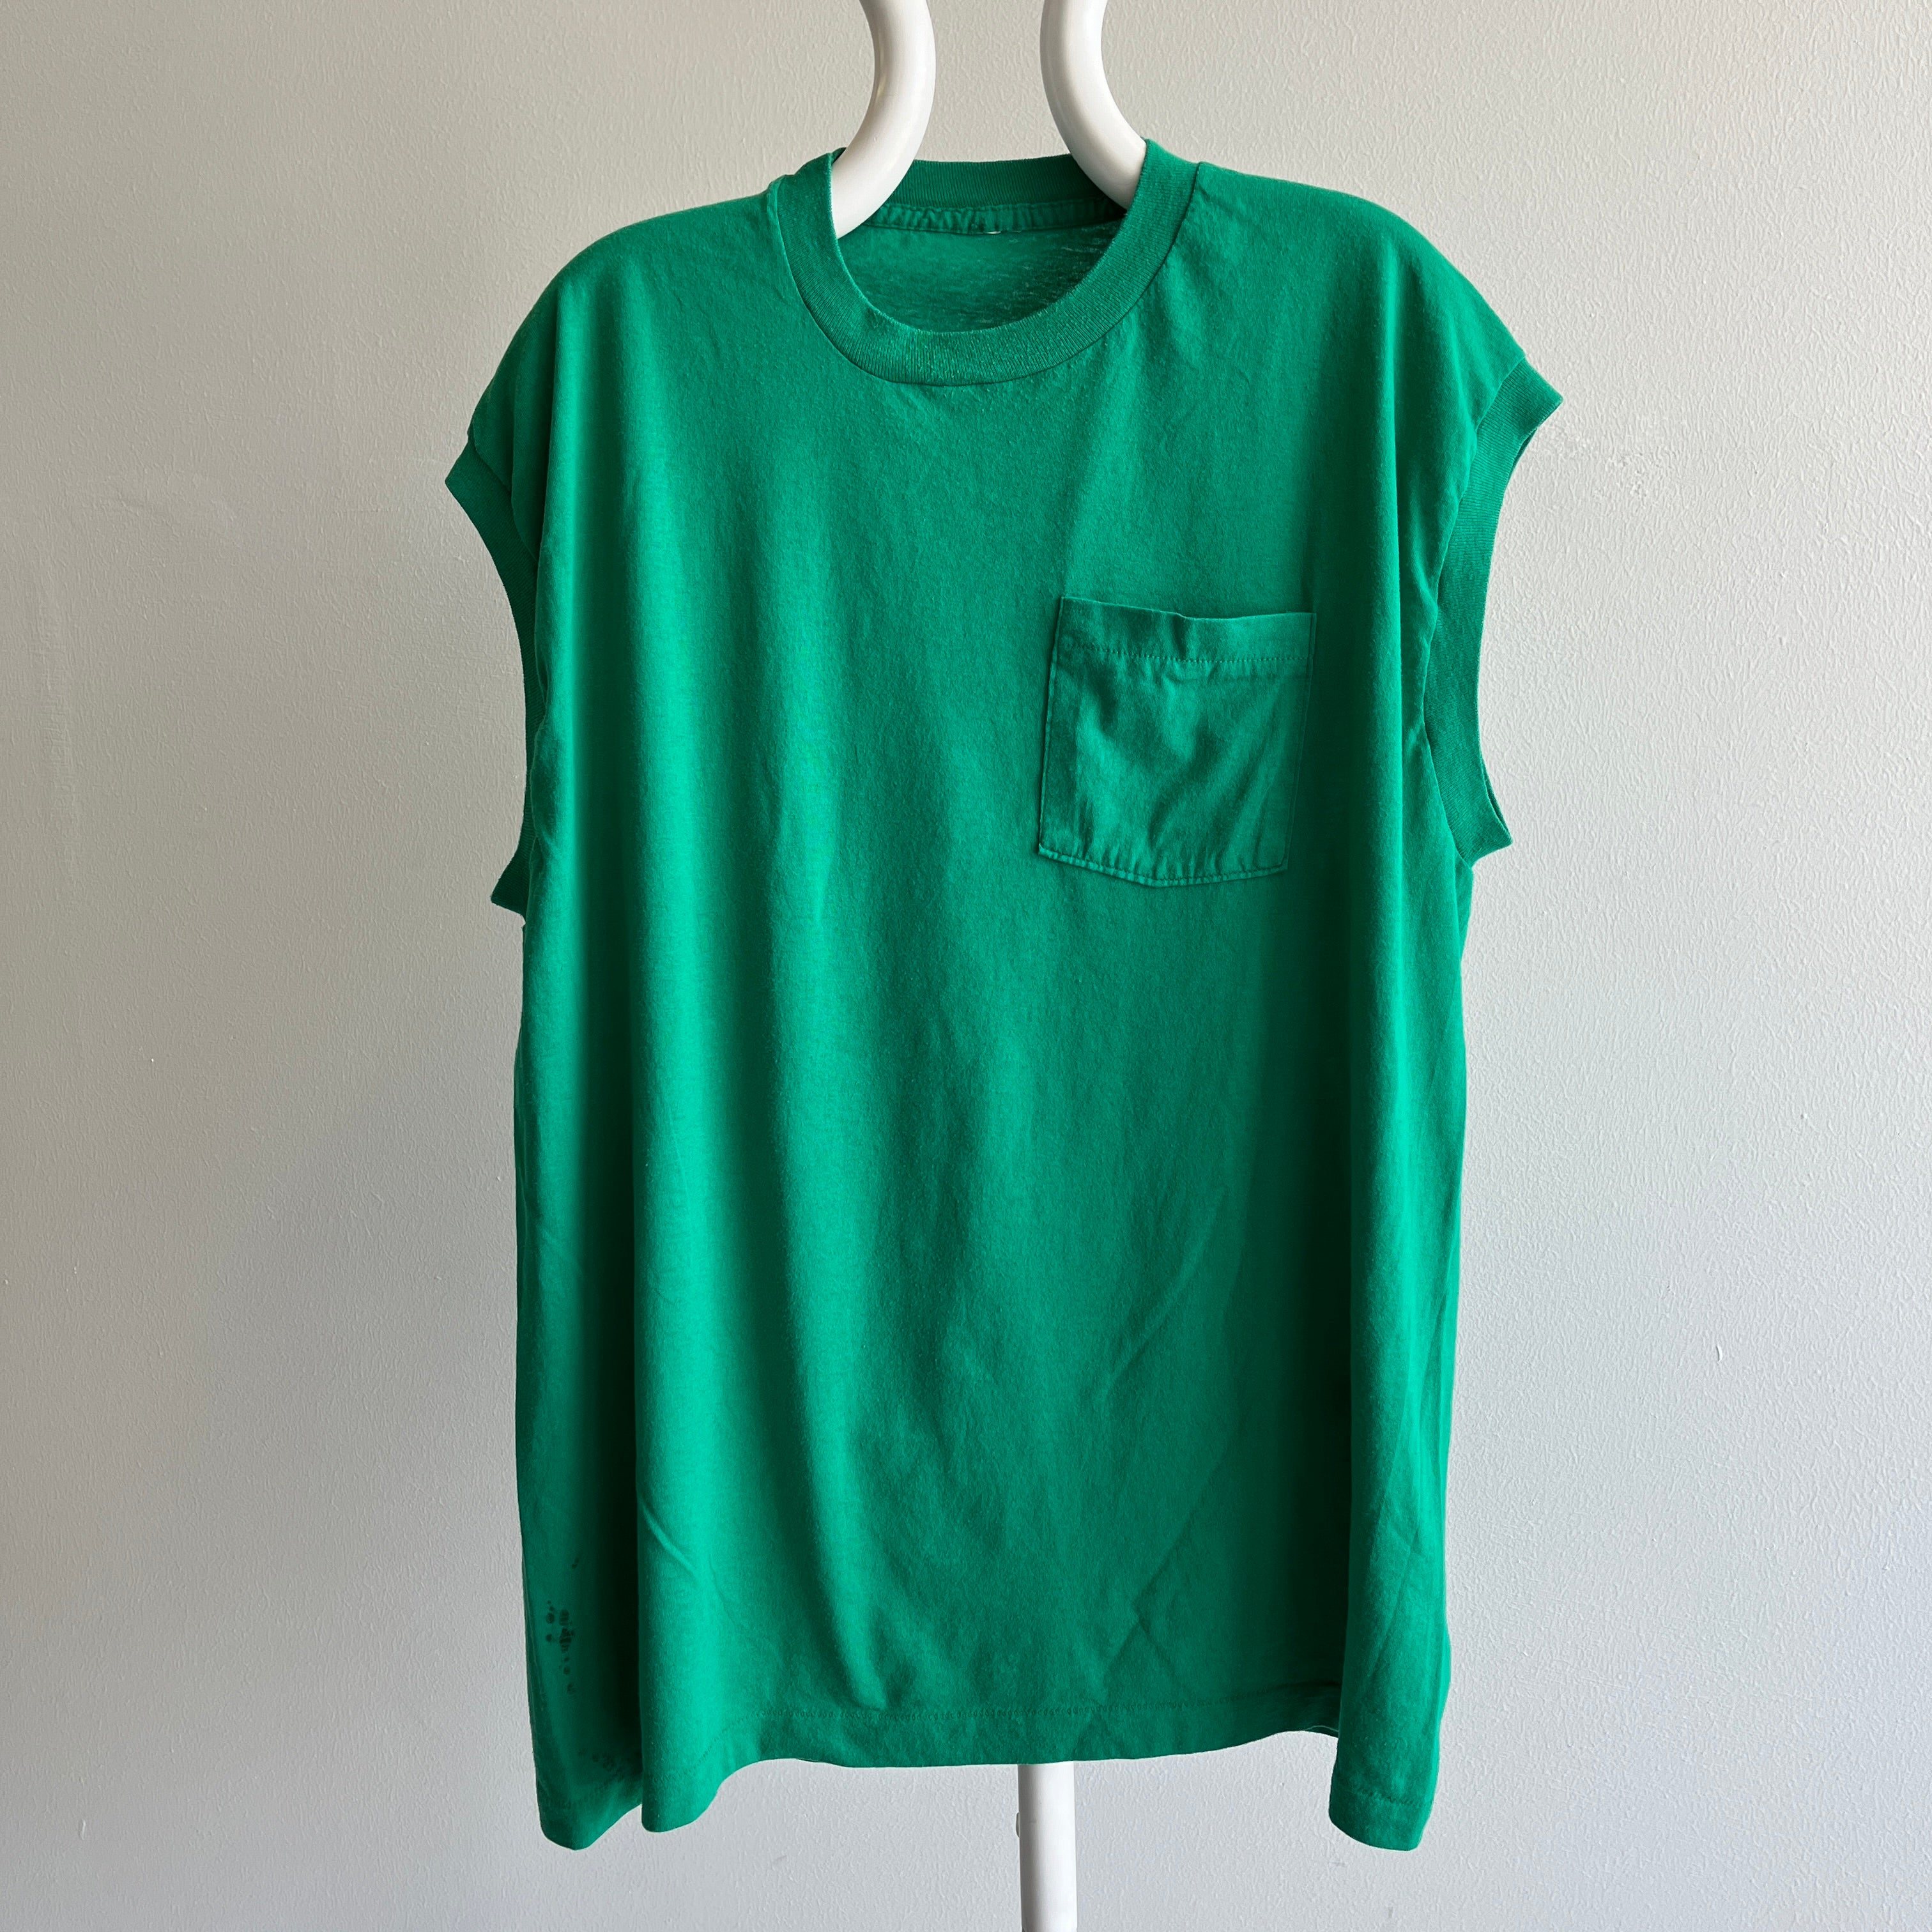 1980s Kelly Green Muscle Tank with a Selvedge Pocket